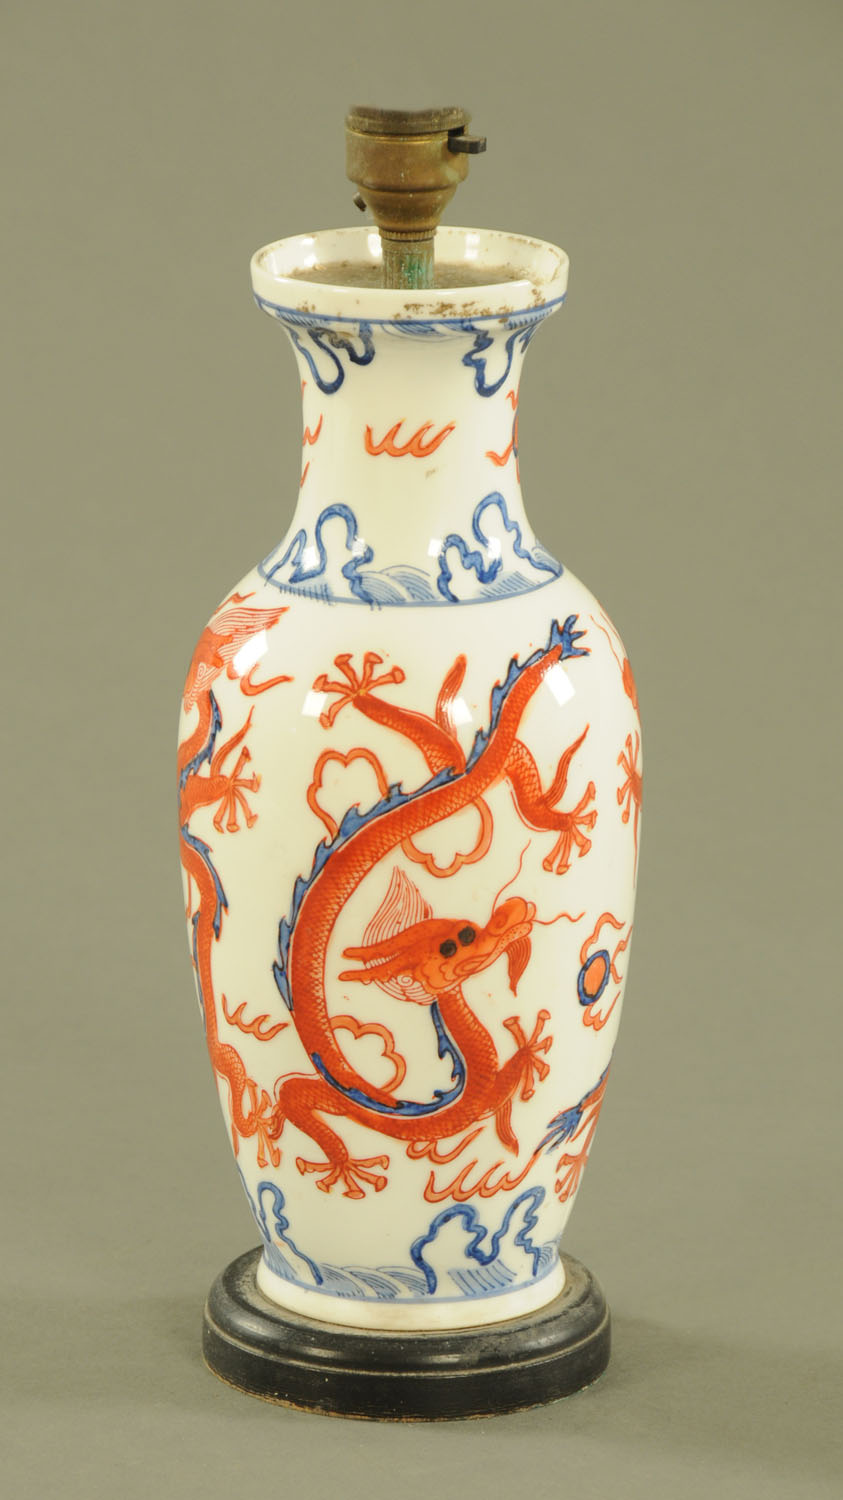 A Chinese vase, converted to a table lamp, decorated with dragons.